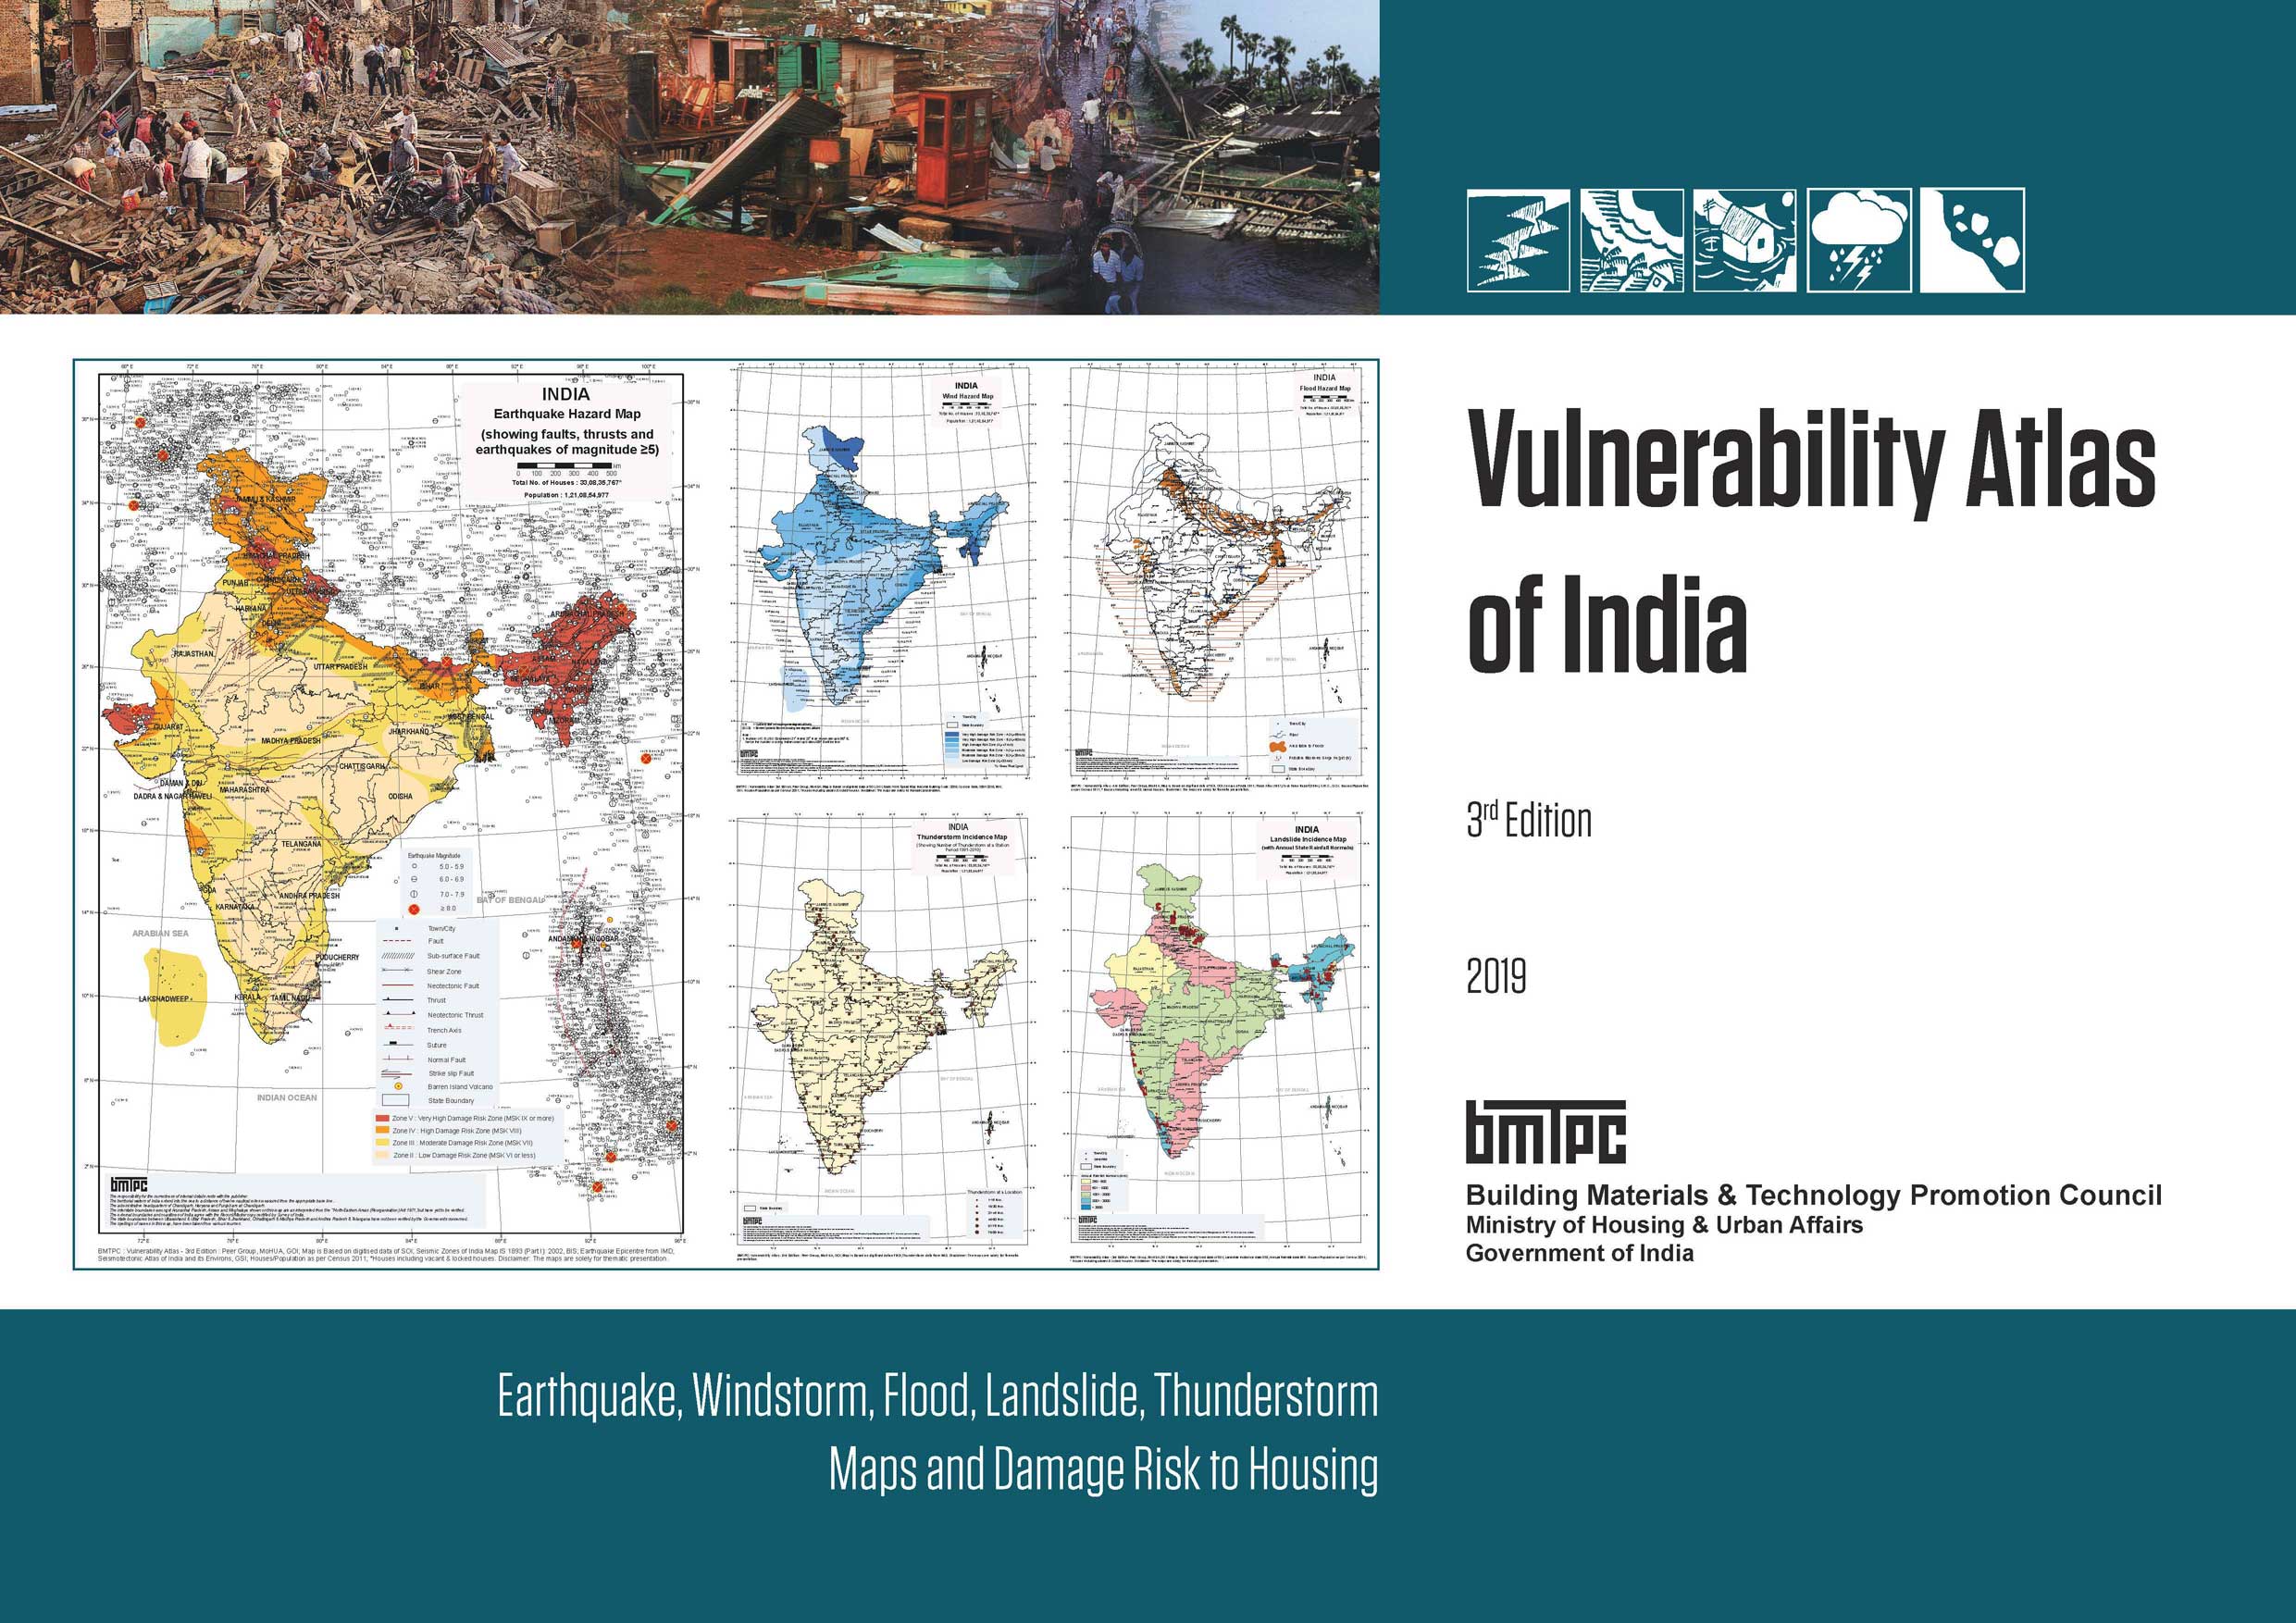 Vulnerability Atlas of India - 3rd Edition